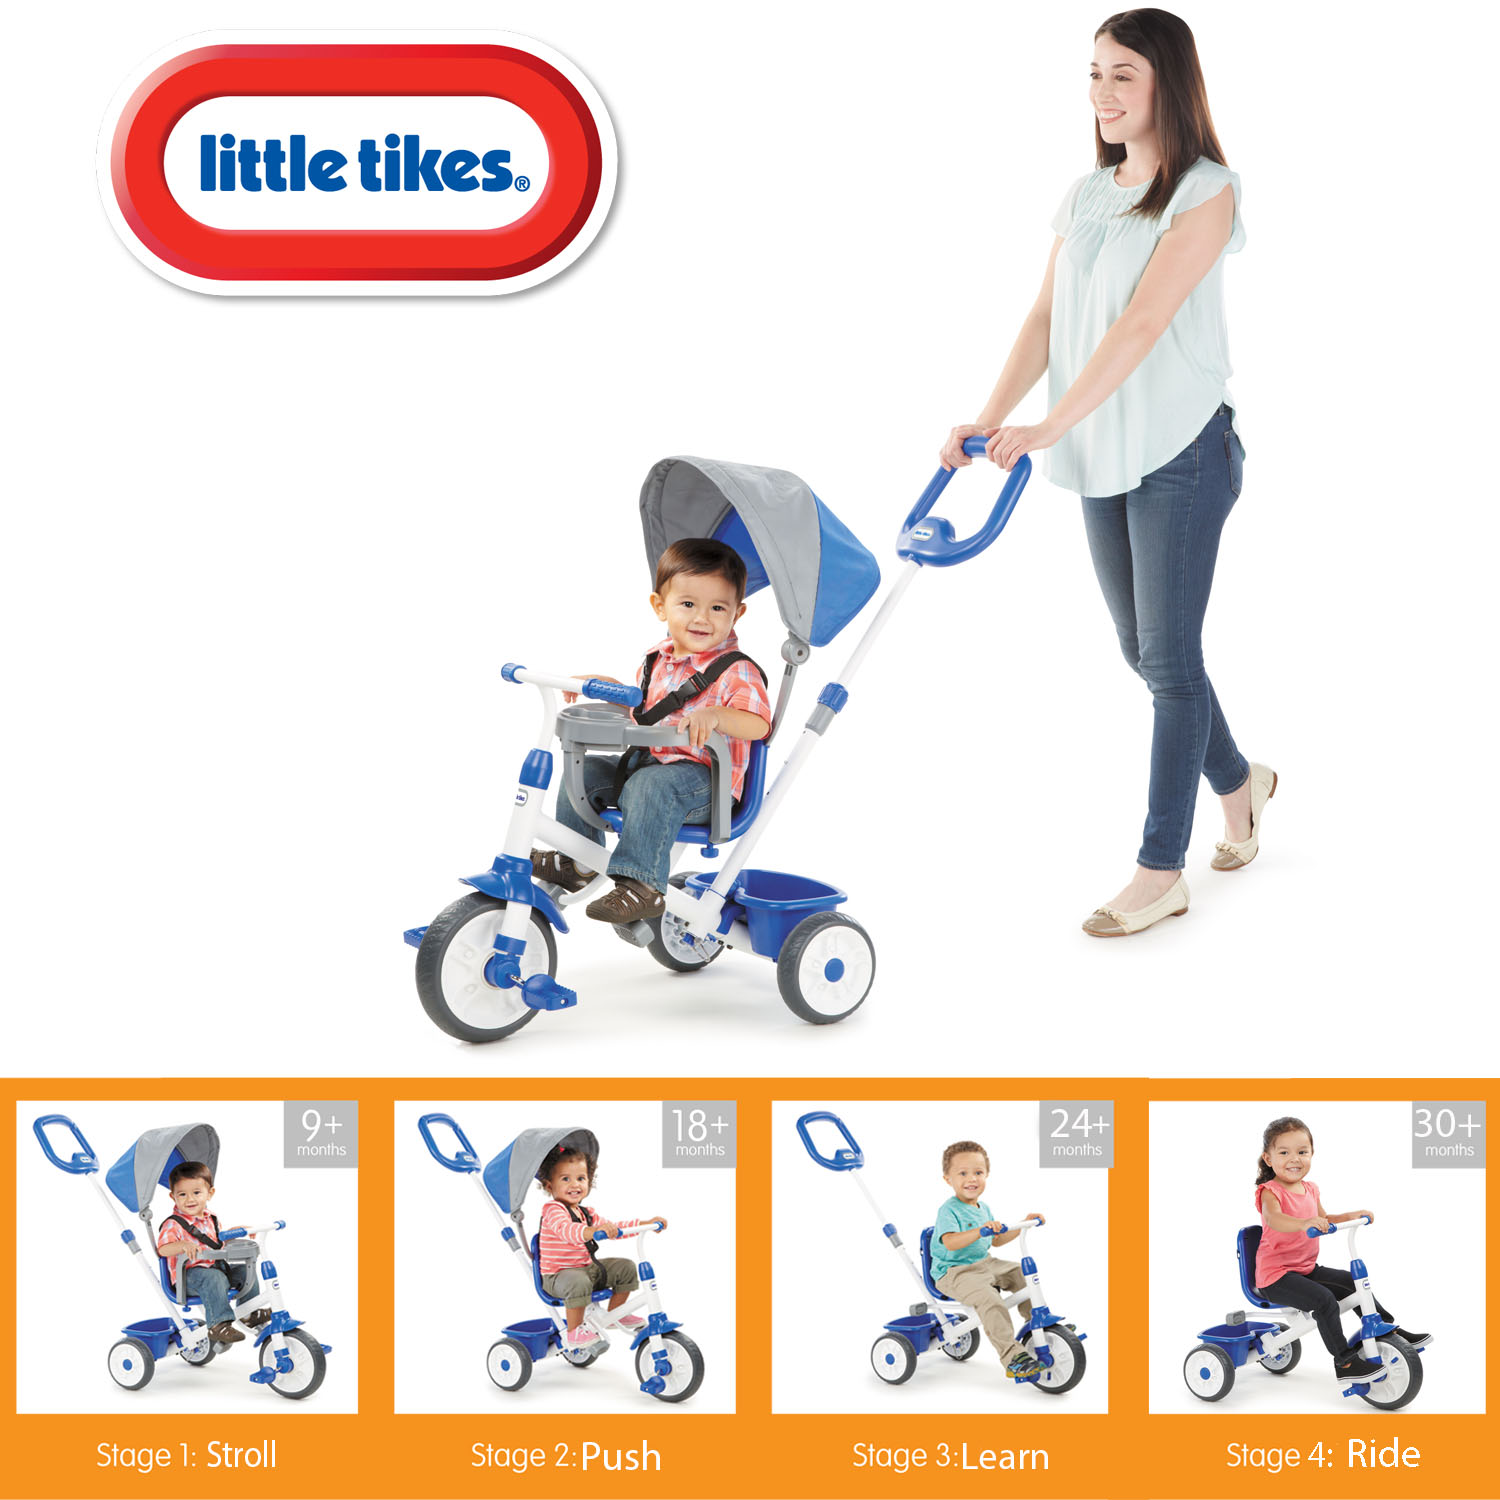 Little Tikes My First Trike 4-in-1 Trike, Blue, Convertible Tricycle, Toddlers w/ 4 Stages of Growth & Shade Canopy, Kids Boys Girls Ages 9 Months to 3 Years - image 3 of 6